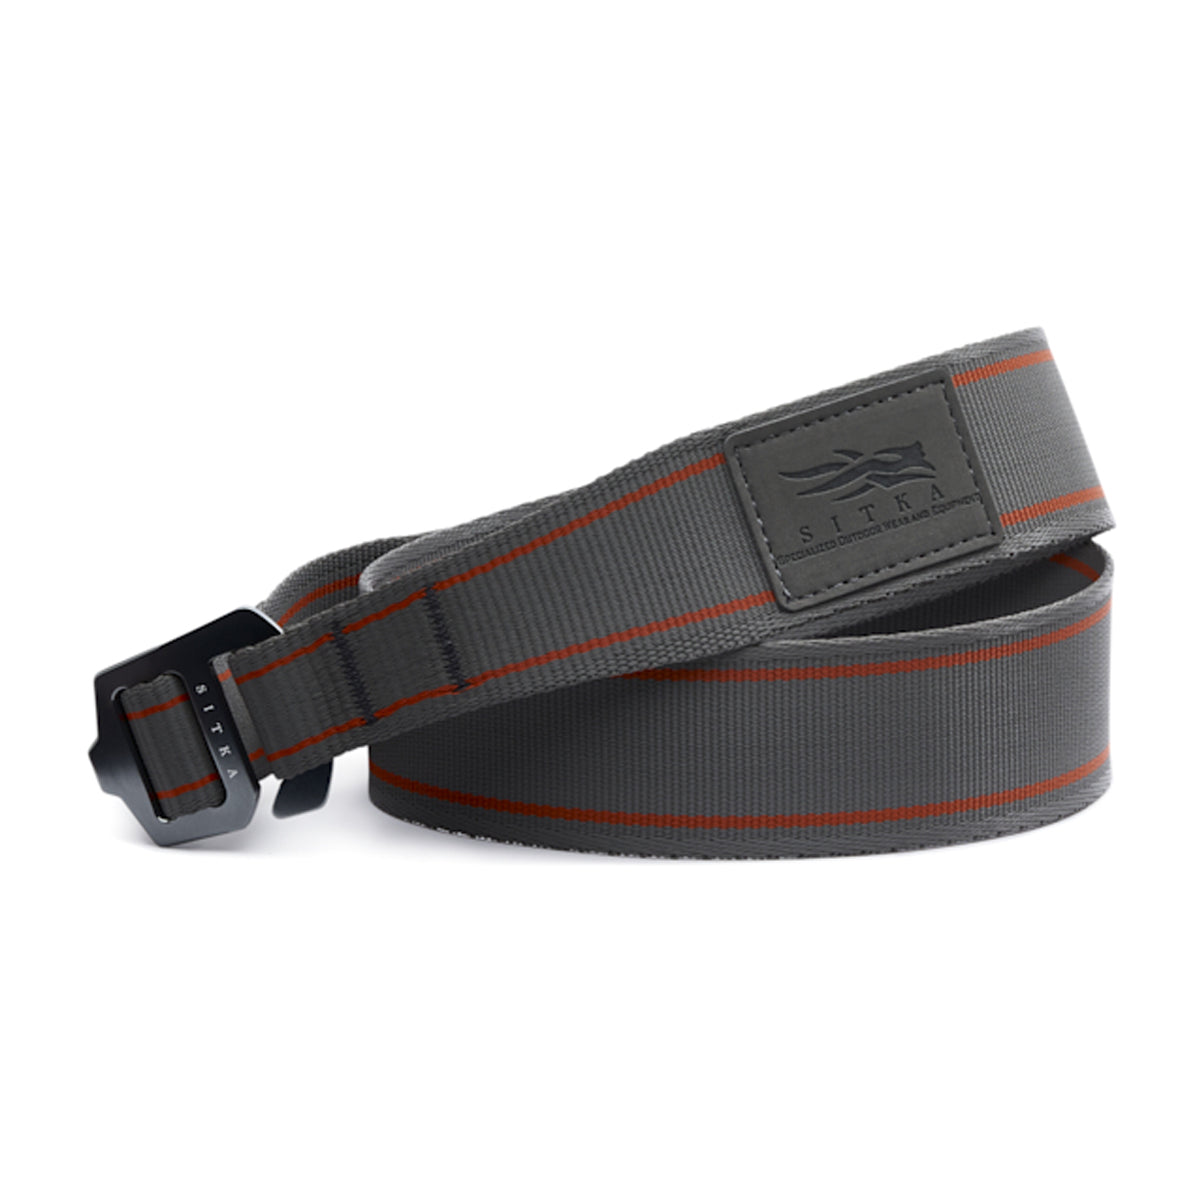 Stealth Belt - REVIEW